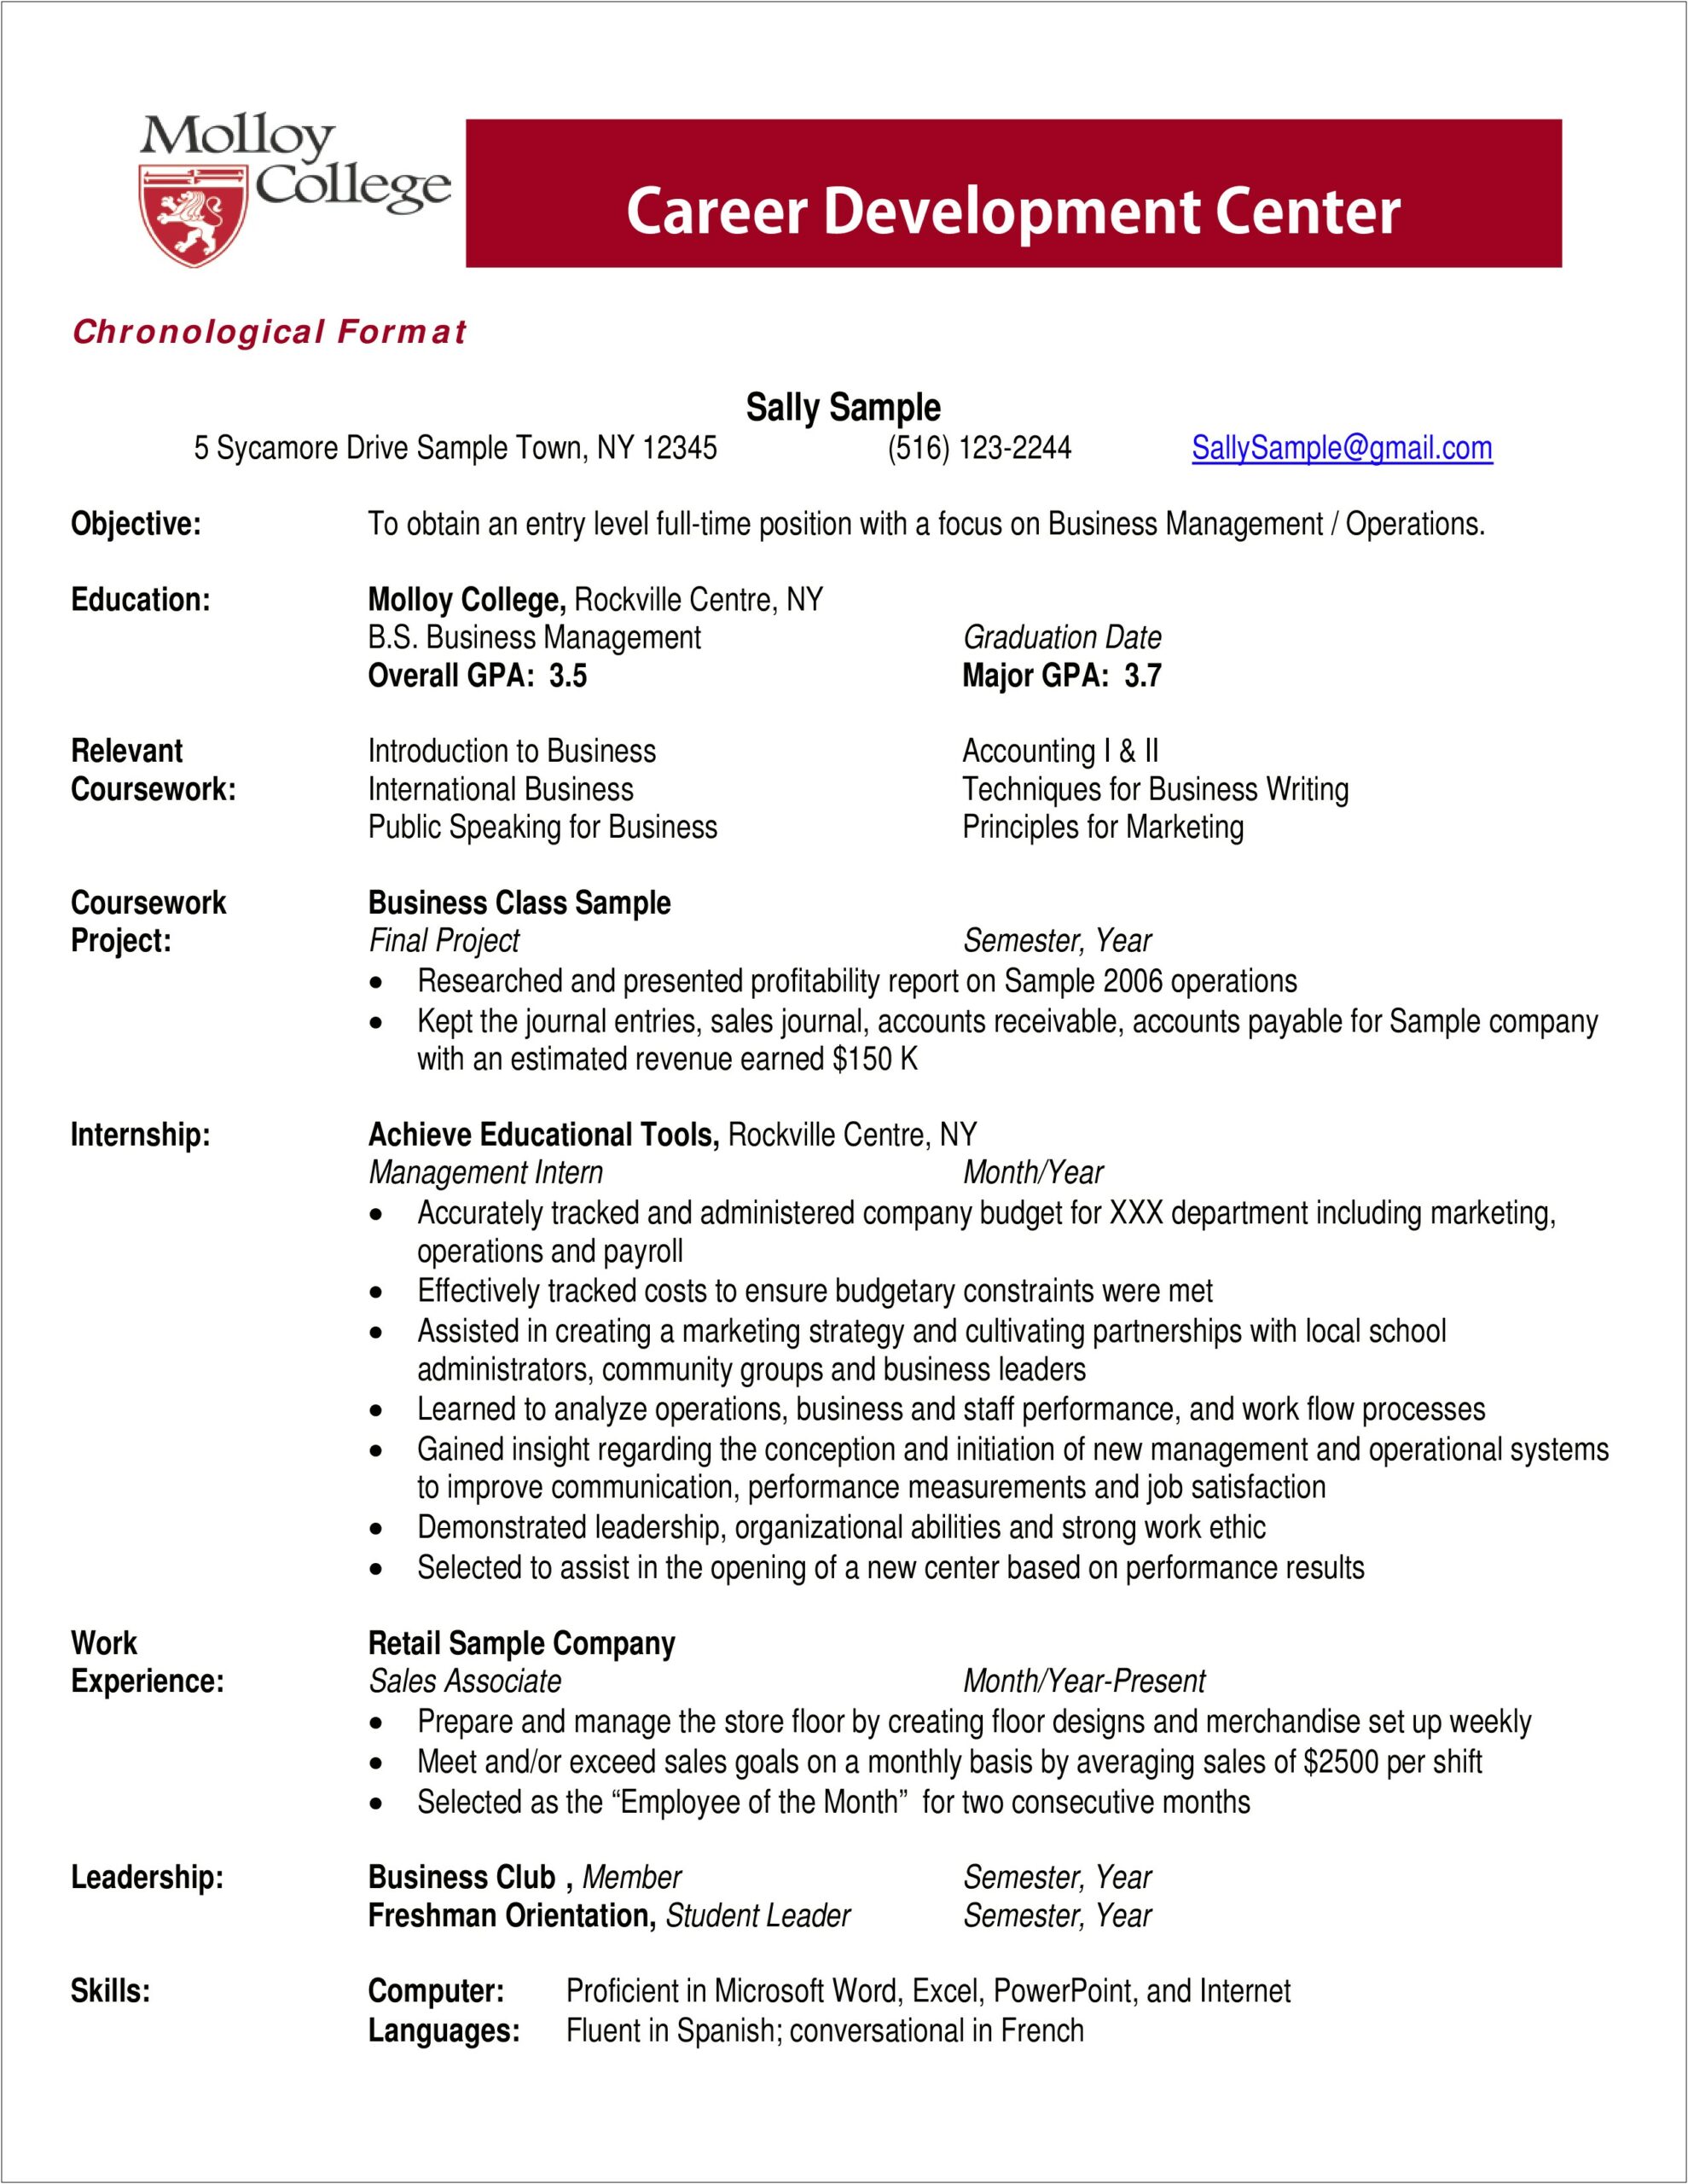 Resume For Social Work College Students